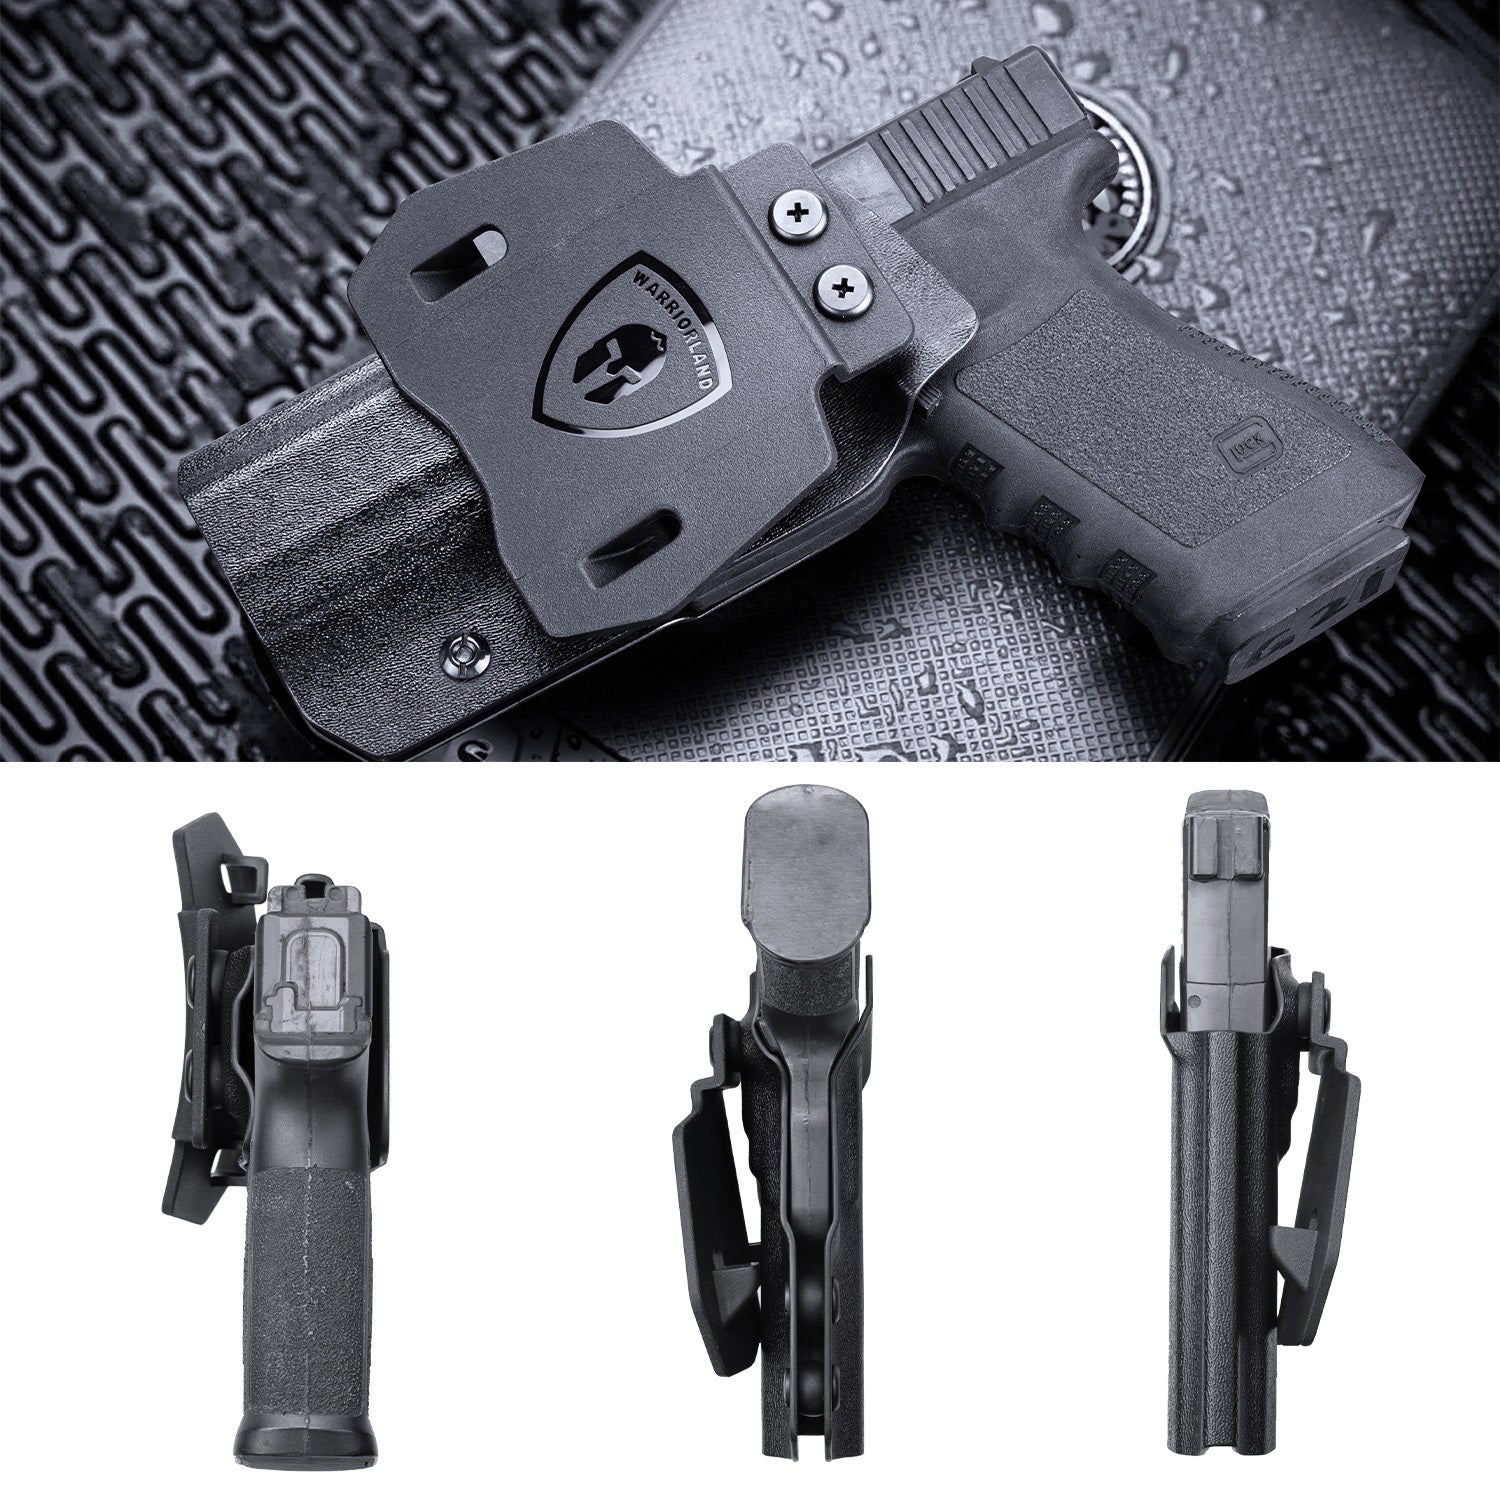 Glock 20 21 22 Holster OWB Kydex Holster Optics Cut: Glock 21 / Glock 20 (Gen 3 4 5) & Glock 22 Gen 5, Outside Waistband Open Carry G21 Holster with 1.75 Inch Paddle, Adj. Retention & Cant, Right|WARRIORLAND